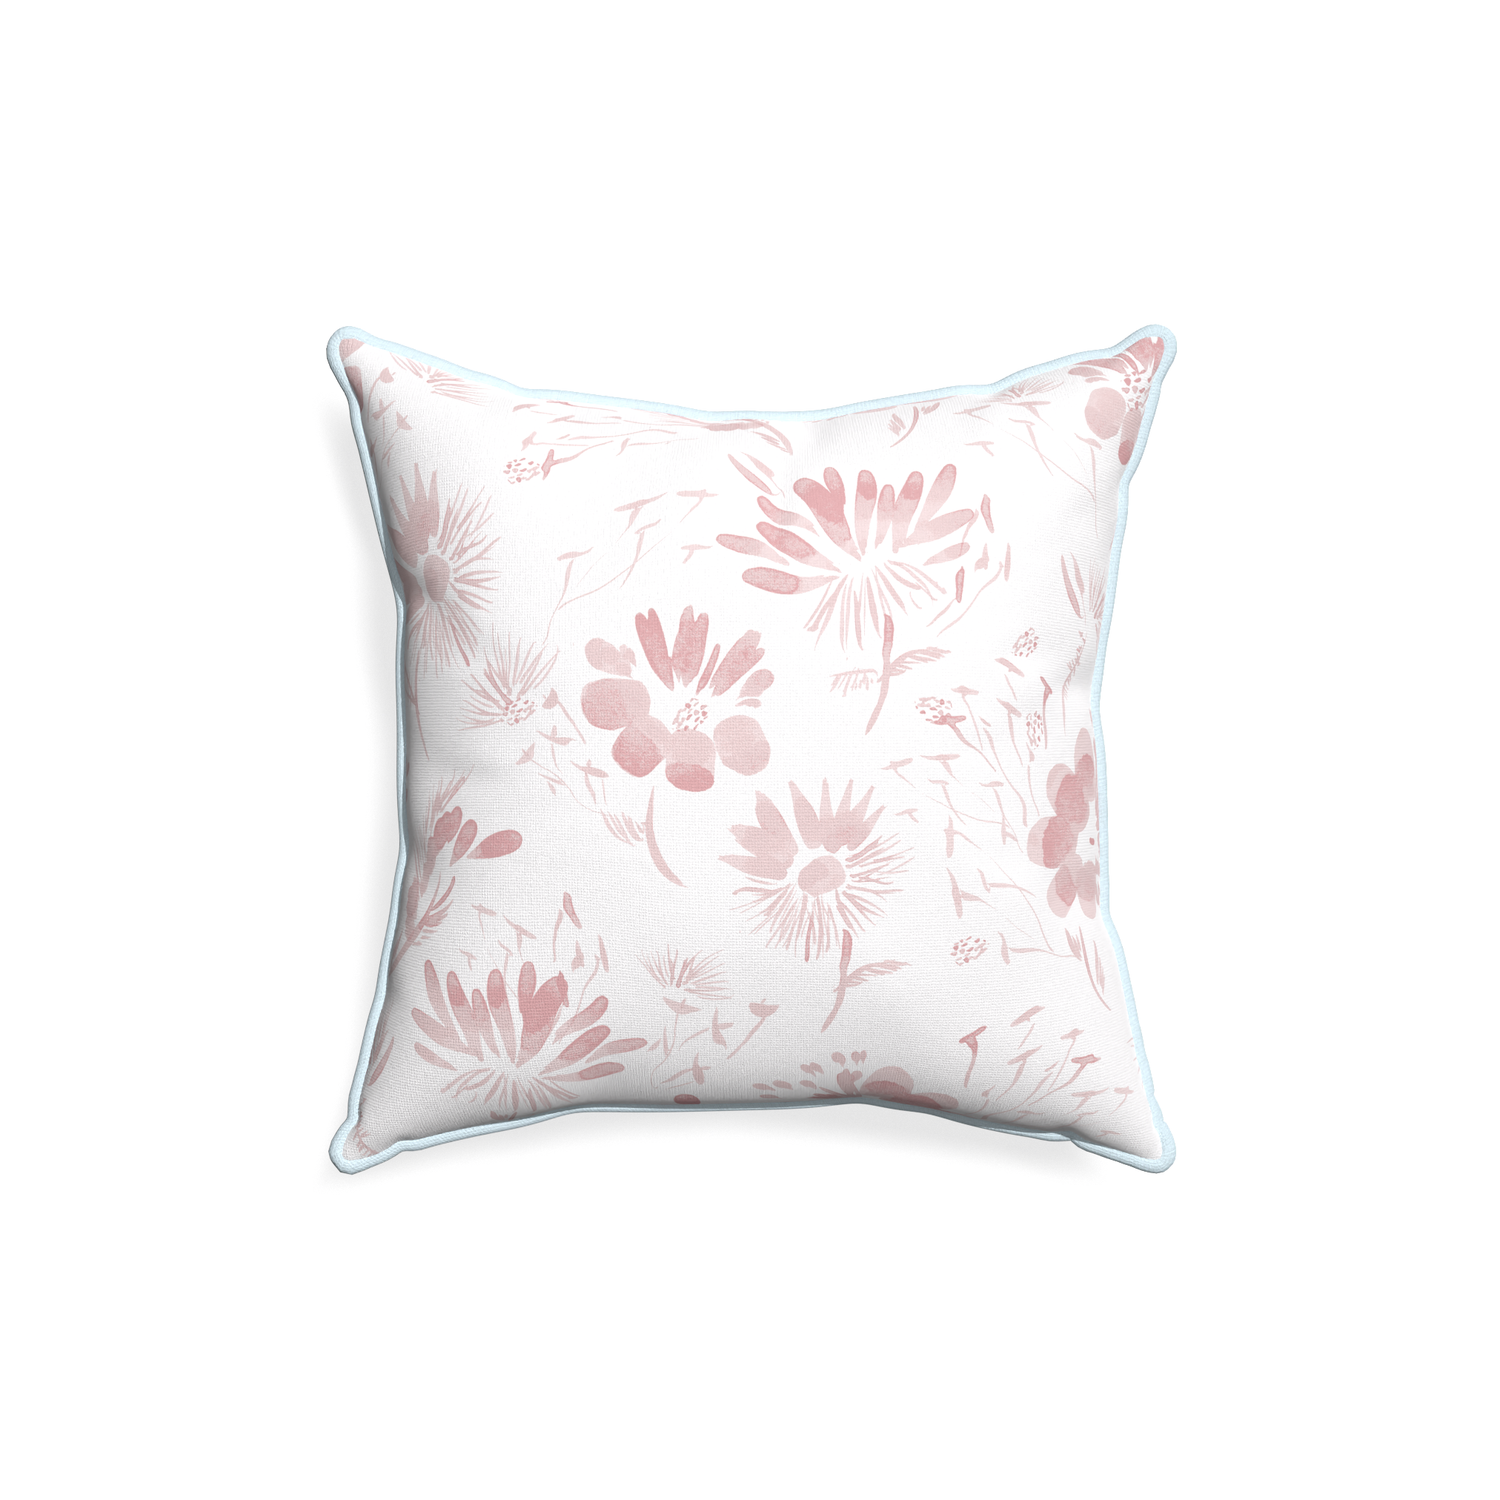 18-square blake custom pillow with powder piping on white background